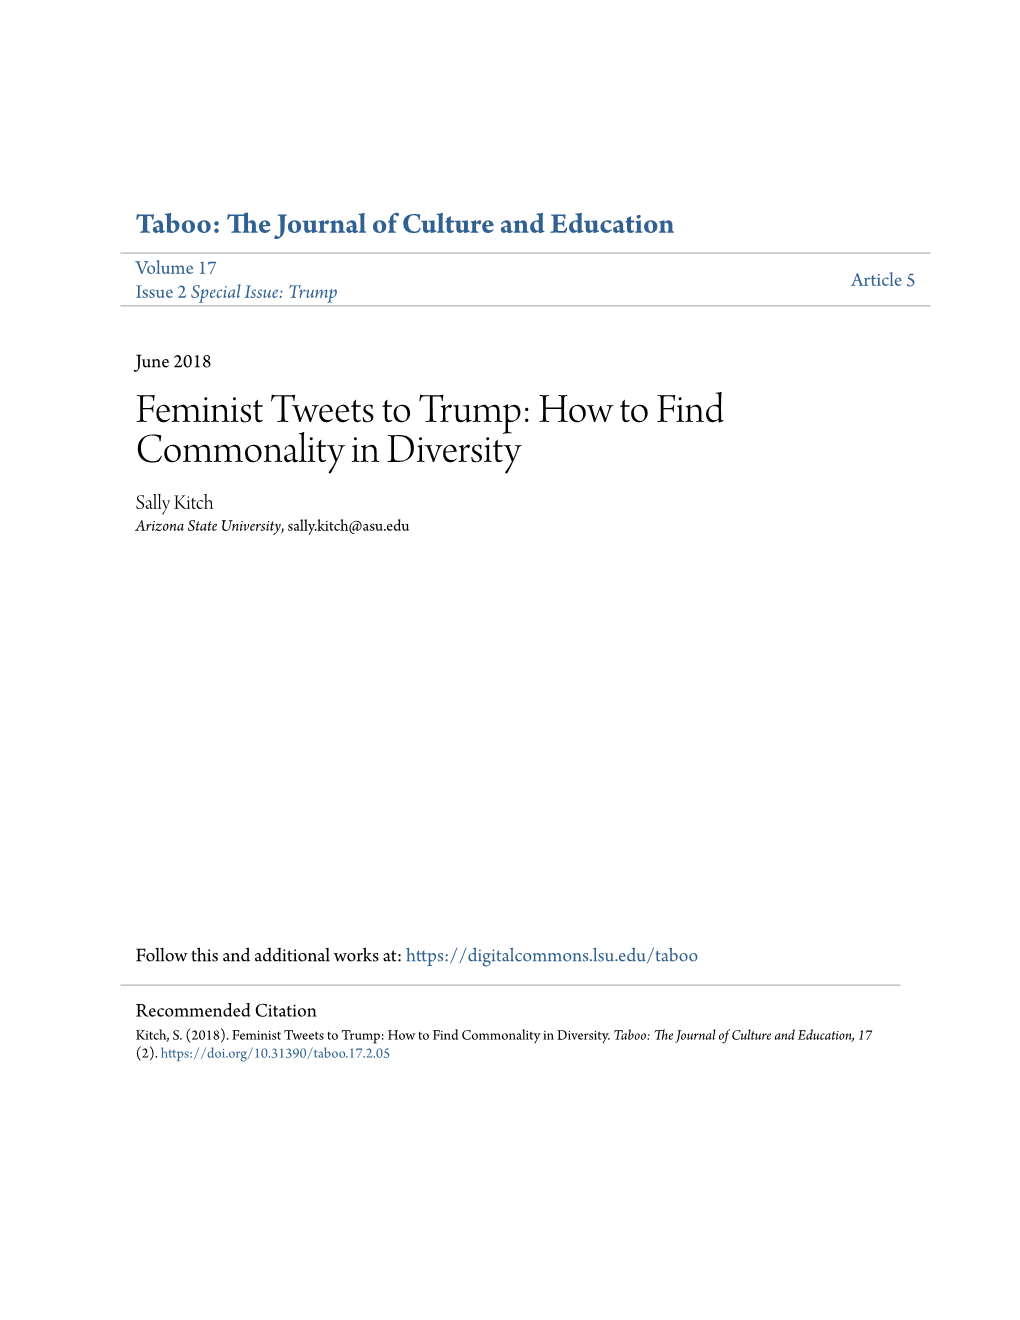 Feminist Tweets to Trump: How to Find Commonality in Diversity Sally Kitch Arizona State University, Sally.Kitch@Asu.Edu